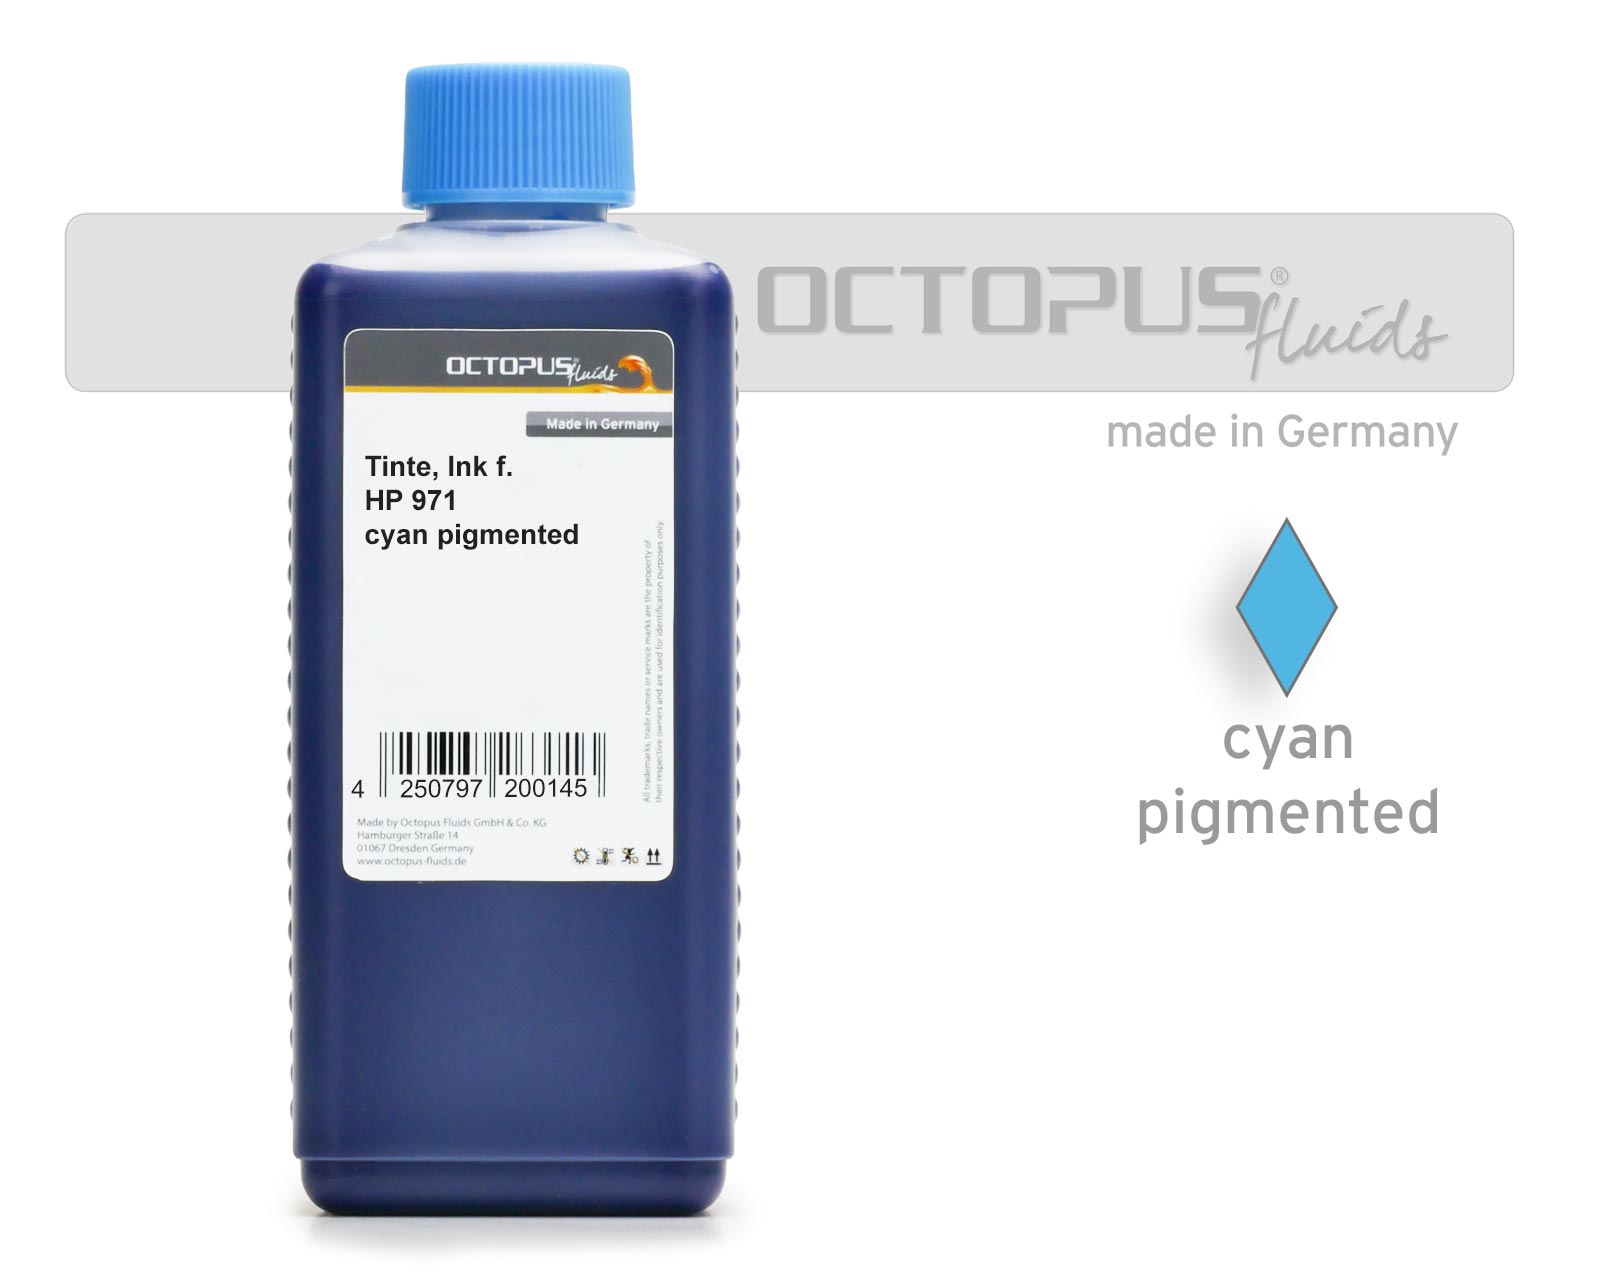 Octopus Refill Ink for HP 971 cyan pigmented